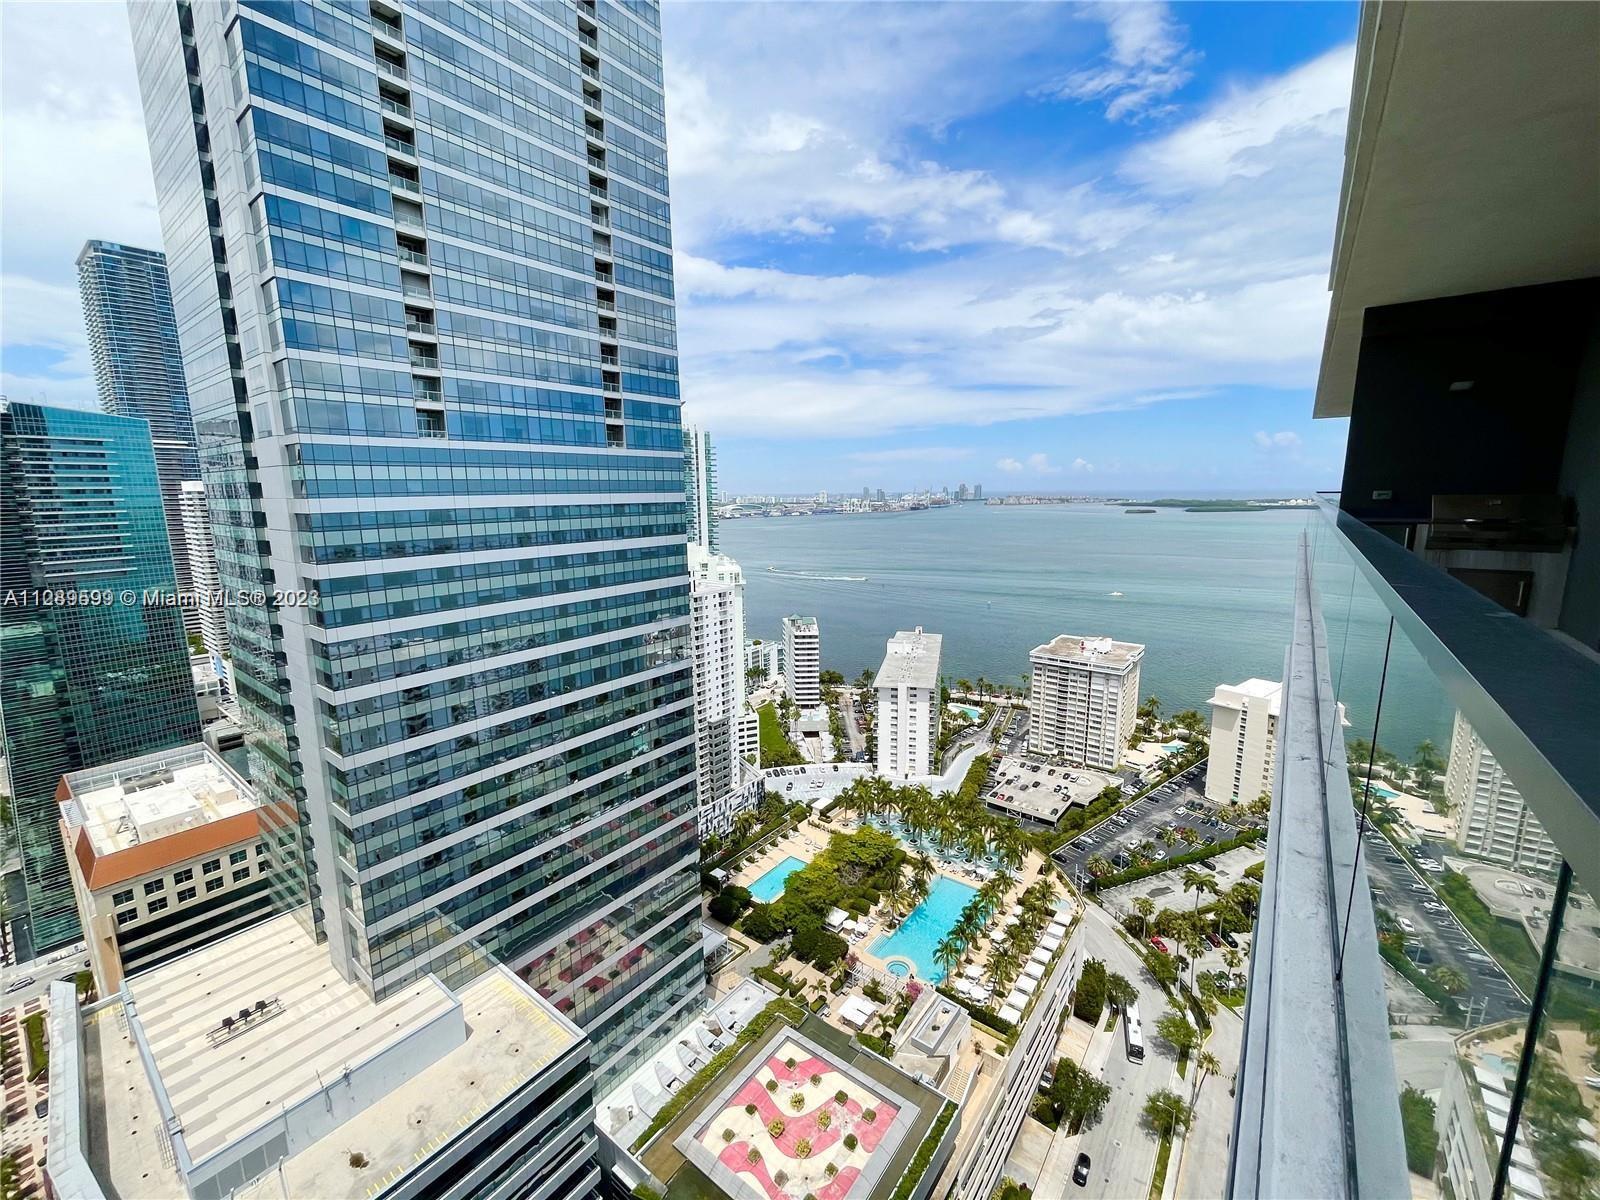 ONE OF A KIND 2 BEDROOM, 2.5 BATH SMART APARTMENT WITH EXPANSIVE TERRACE IN THE HEART OF BRICKELL. RESIDENCE FACES NORTH WEST WITH STUNNING VIEWS OF BRICKELL AND BISCAYNE BAY, WITH BREATHTAKING SUNSETS. BUILT IN BBQ AND SUMMER KITCHEN. FLOOR TO CEILING WINDOWS, SHADES, ESPRESSO MACHINE, BUILT IN SMART SOUND SYSTEM THROUGHOUT, FULL SIZE WASHER/DRYER, AND TOP OF THE LINE APPLIANCES. 2 PARKING SPACES (VALET). ECHO IS ONE OF THE MOST EXCLUSIVE AND PRESTIGIOUS BRAND NEW BOUTIQUE BUILDINGS. AMENITIES INCLUDE INFINITY VIEW POOL AND DECK SERVING FOOD AND DRINKS OVERLOOKING BISCAYNE BAY, CITY AND DOWNTOWN MIAMI, 24/7 CONCIERGE, VALET, SECURITY, FULLY EQUIPPED GYM AND SPA. VACANT AND EASY TO SHOW!